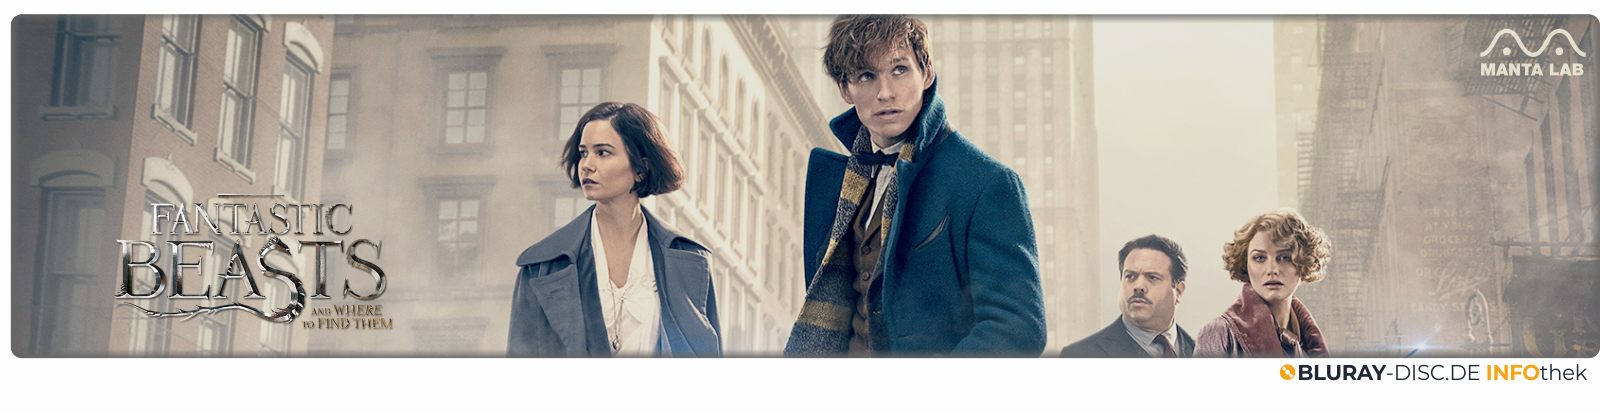 Moviebanner_Manta_Lab_Fantastic_Beasts_and_Where_to_Find_Them.png